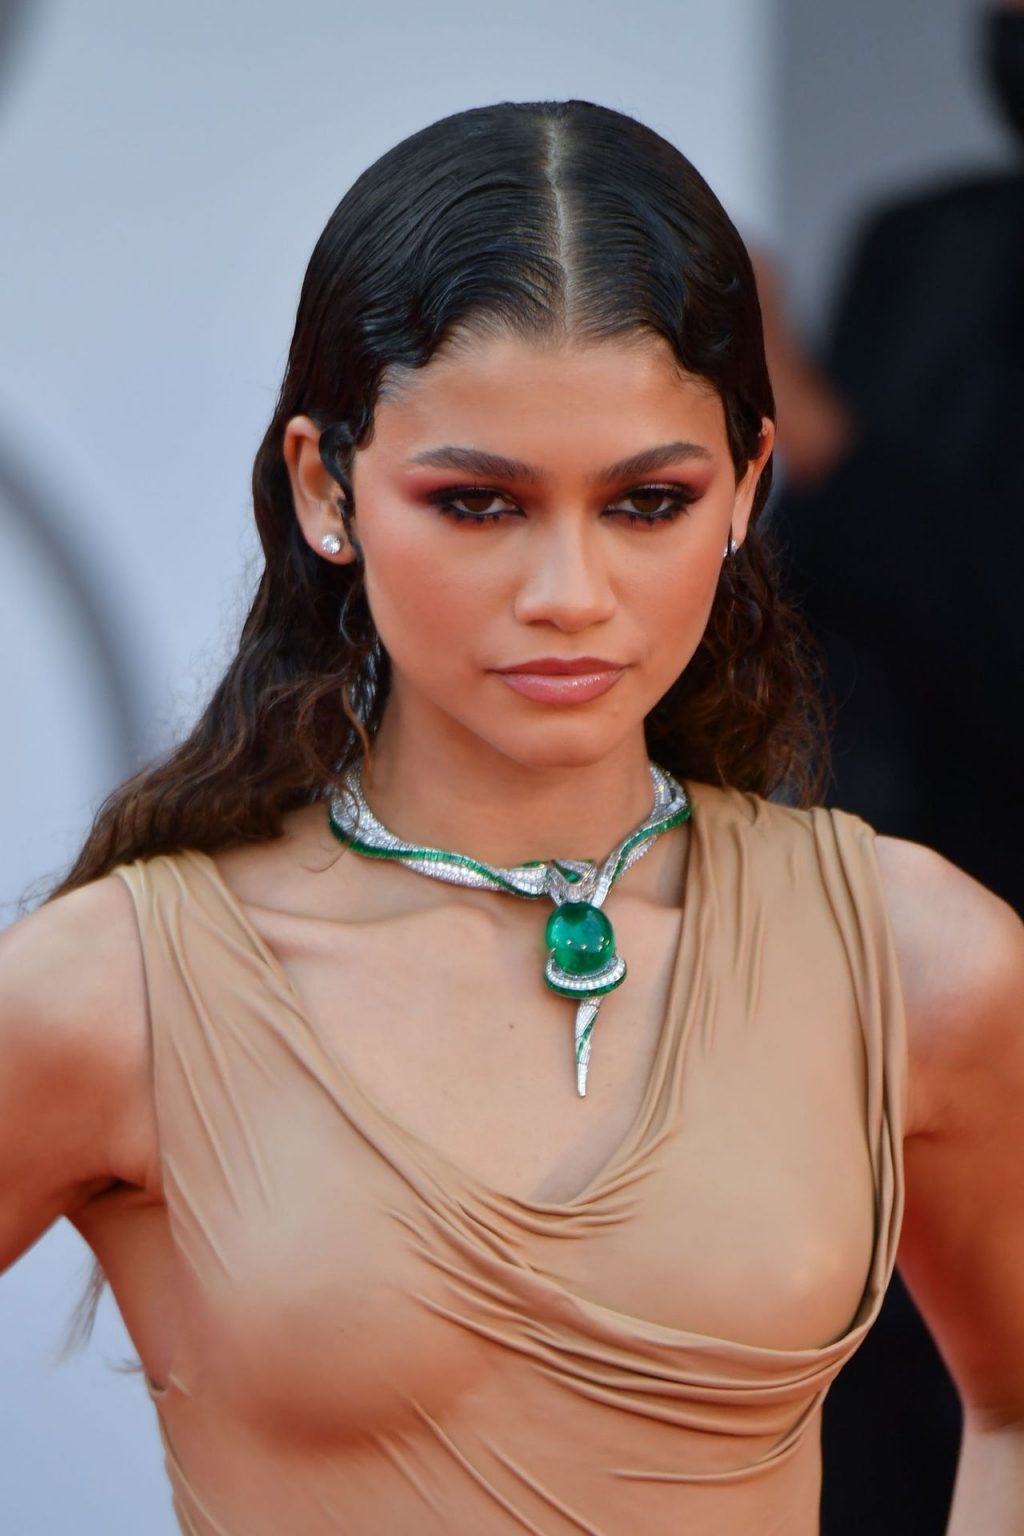 Leggy Zendaya Joins On-Screen Lover Timothée Chalamet on the Red Carpet in Venice (184 Photos) [Updated]